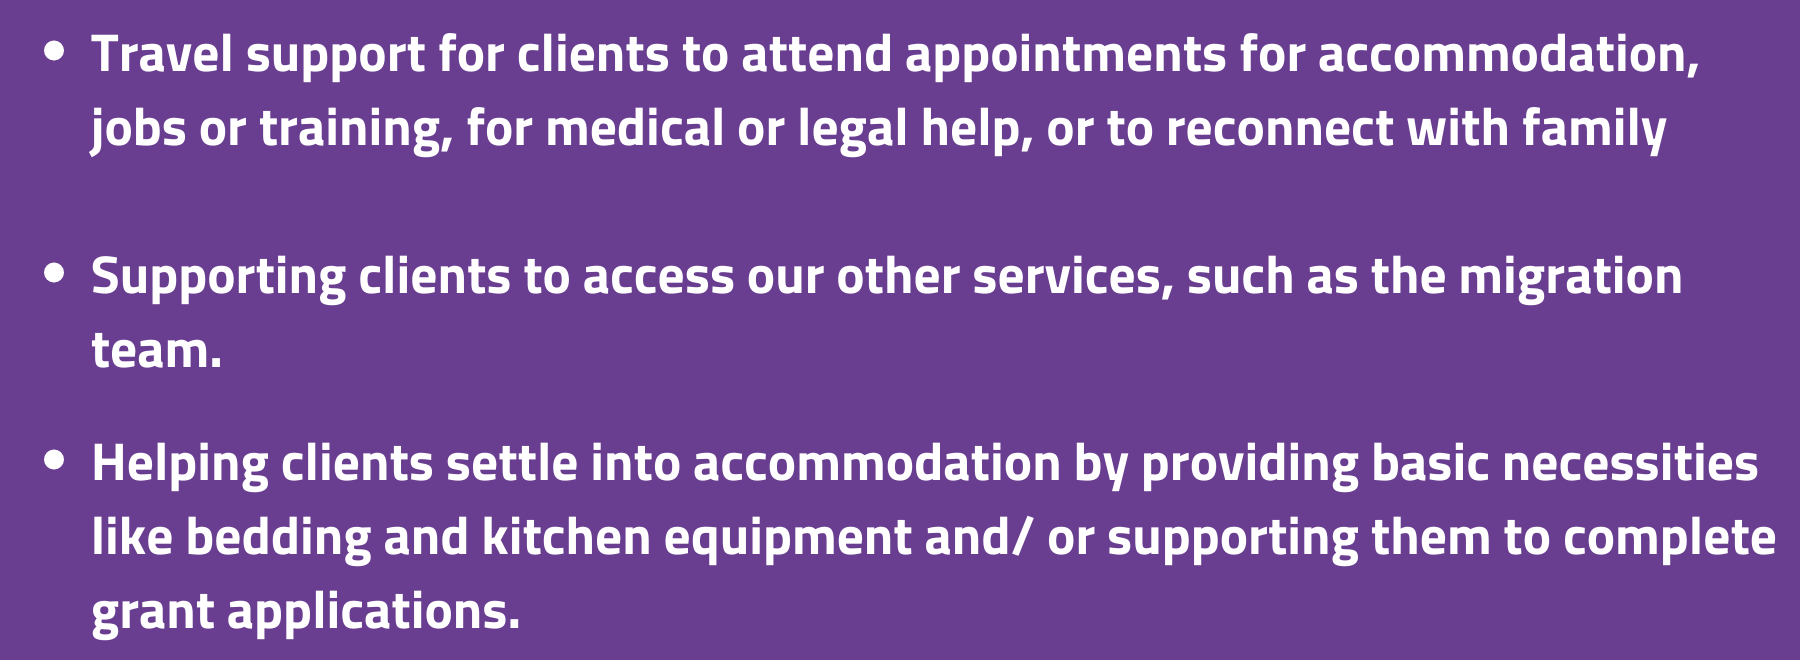 
Travel support for clients to attend appointments for accommodation, jobs or training, for medical or legal help, or to reconnect with family and friends

Supporting clients to access our other services, such as the migration team and our recovery and opportunities activities 

Helping clients settle into accommodation by providing basic necessities like bedding and kitchen equipment, providing vouchers and/ or supporting them to complete grant applications.
